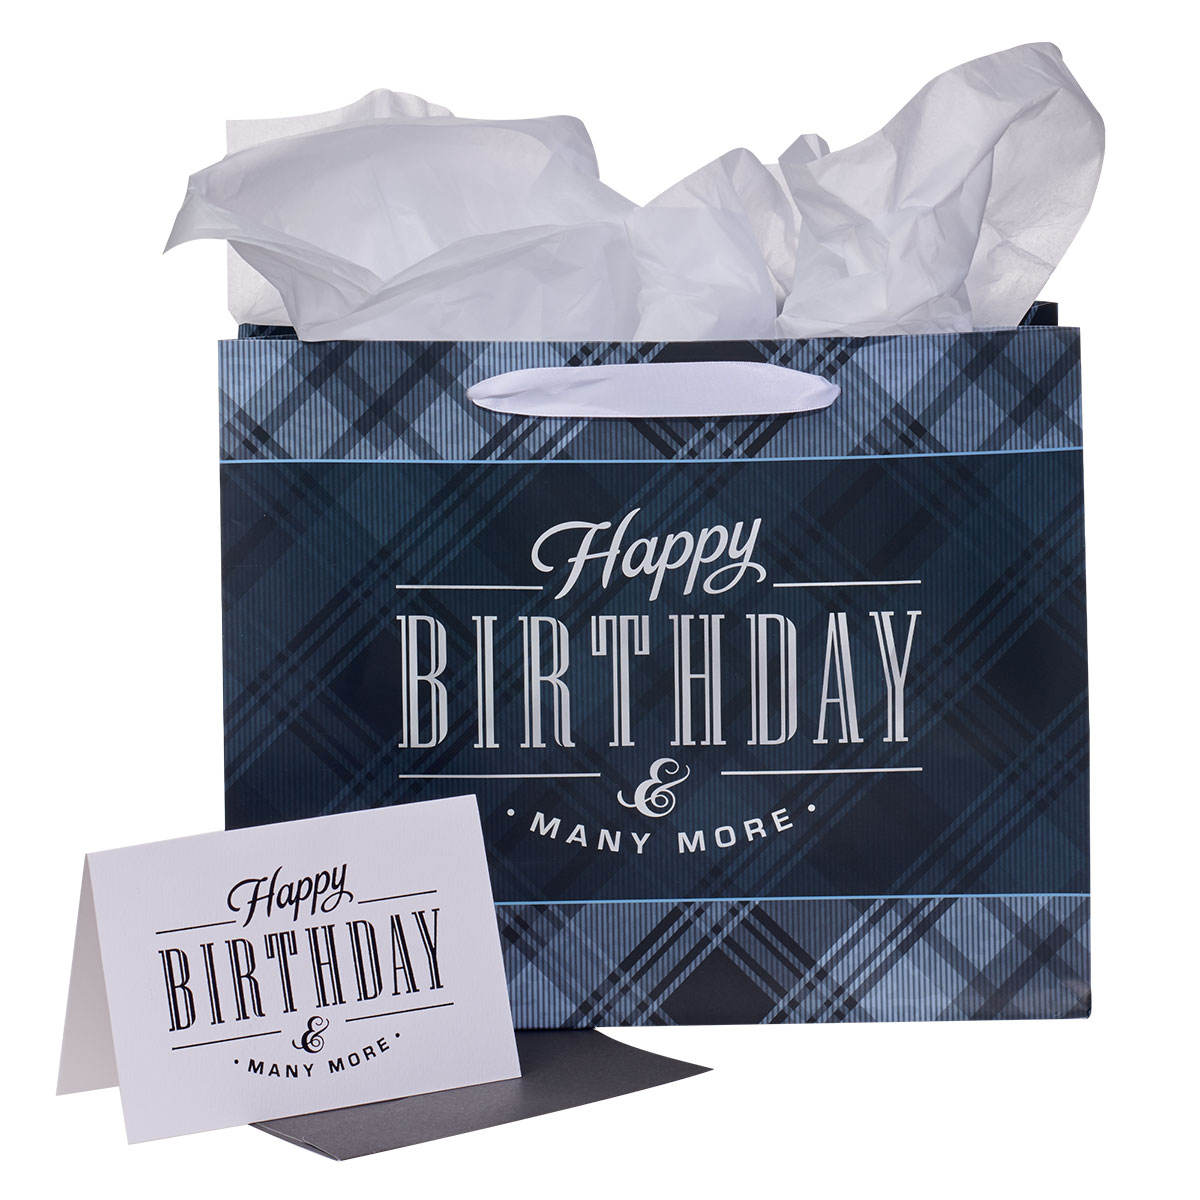 Christian Art Gifts 21887X Large Happy Birthday & Many More Gift Bag with Card & Tissue